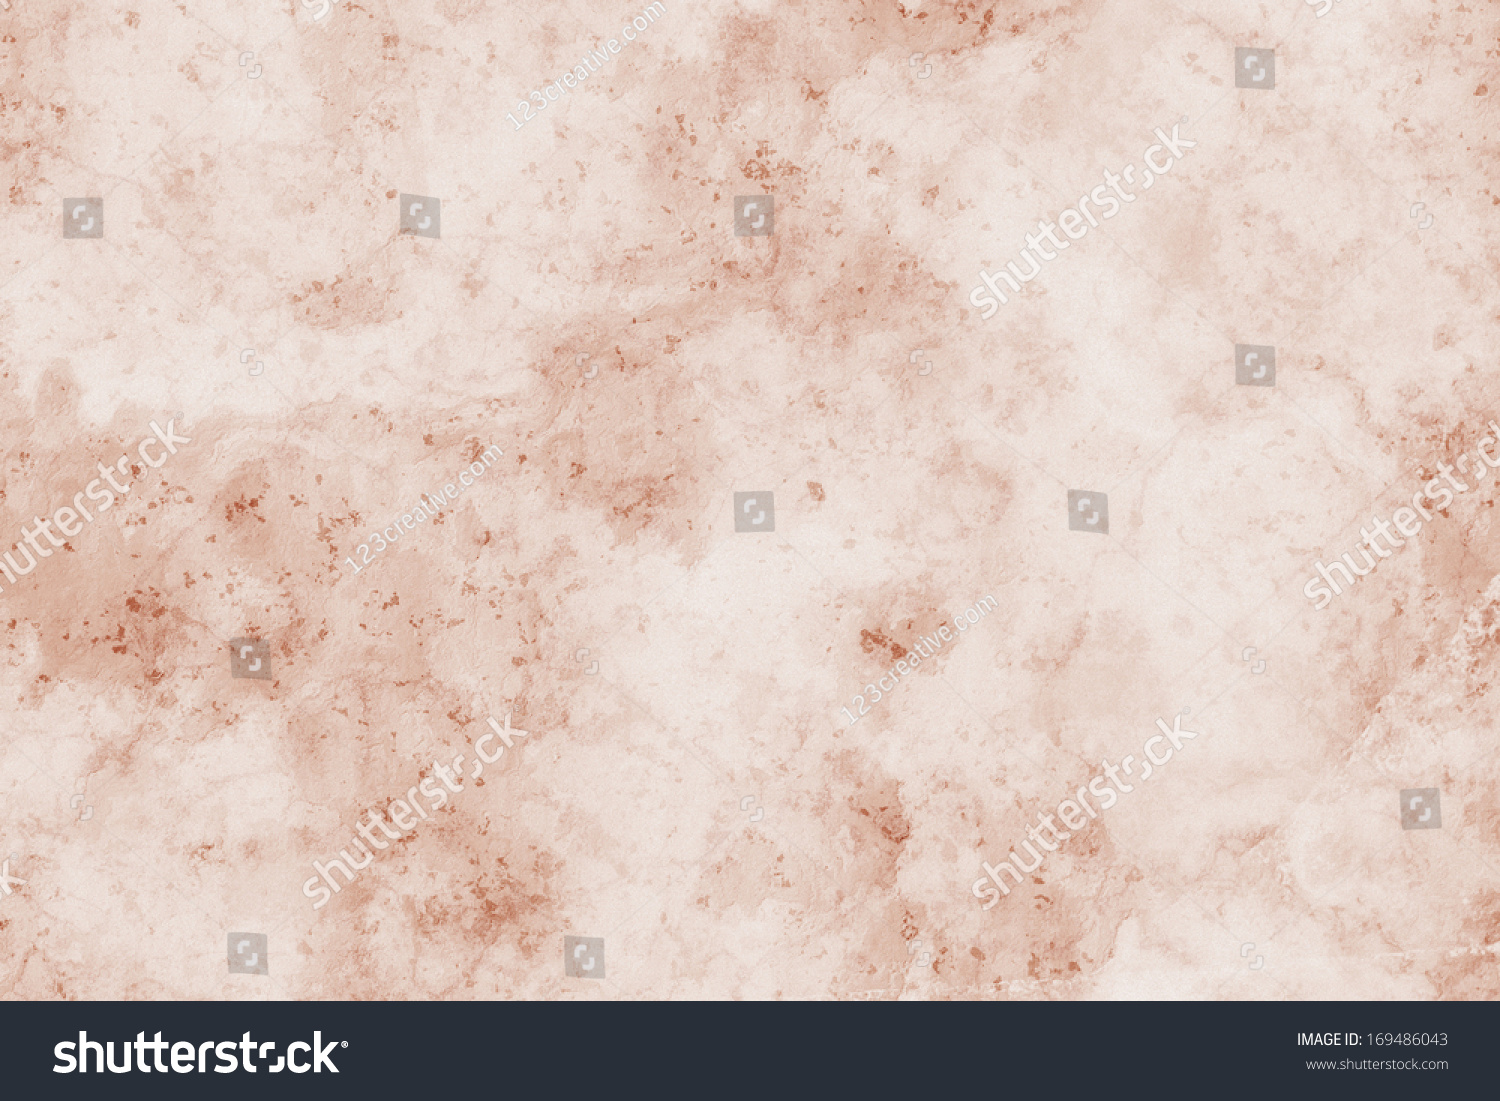 Old pink marble background texture - vintage structure #169486043